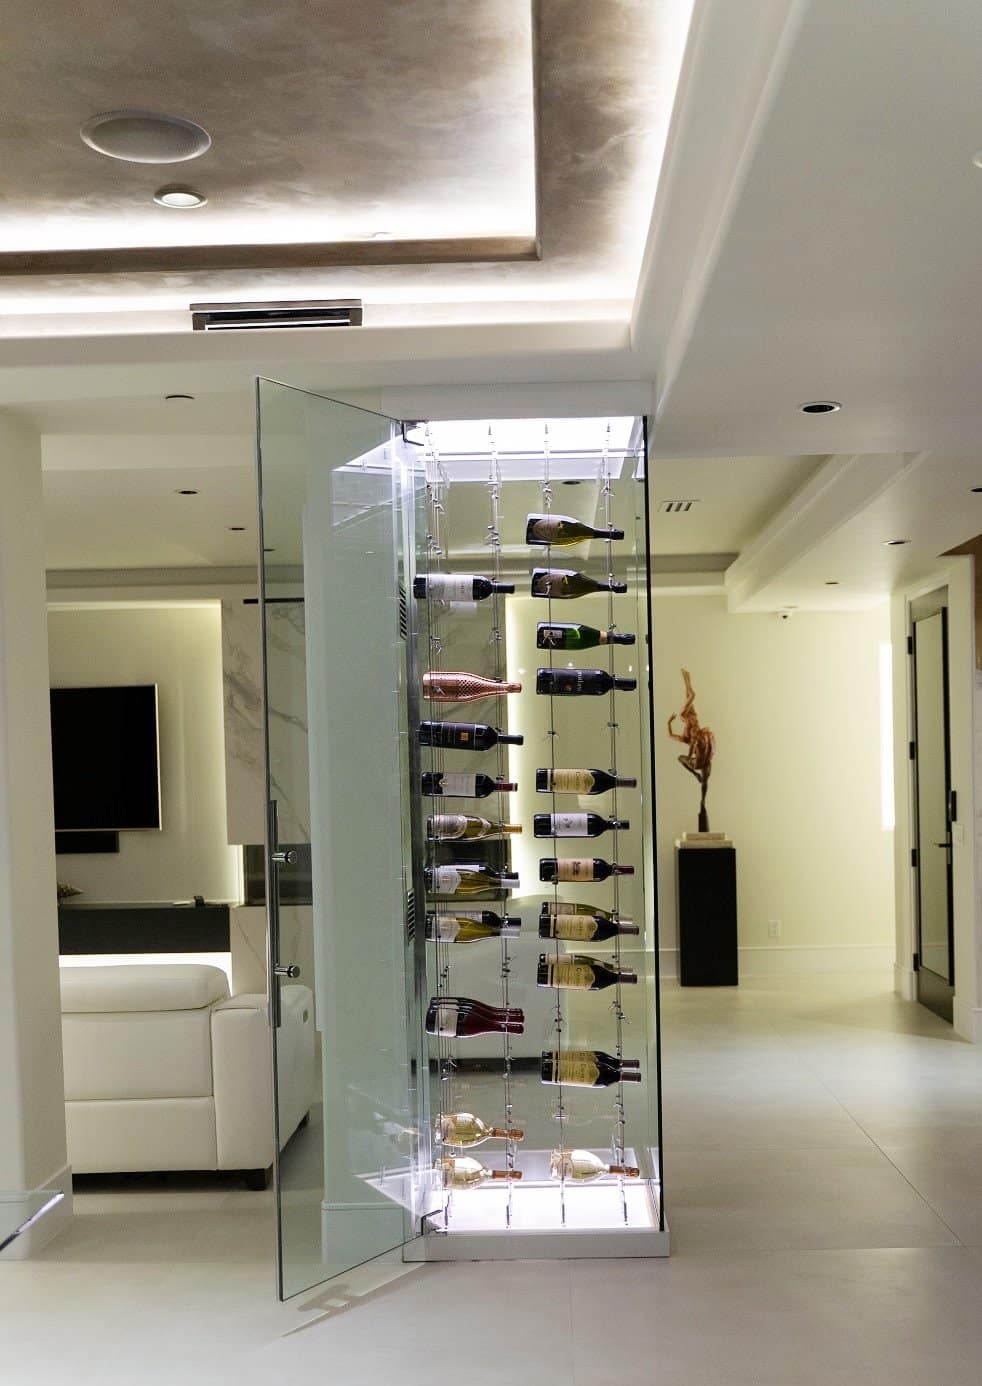 This Glass-Enclosed Wine Display is a Unique Modern Wine Cellar Idea Worth Copying